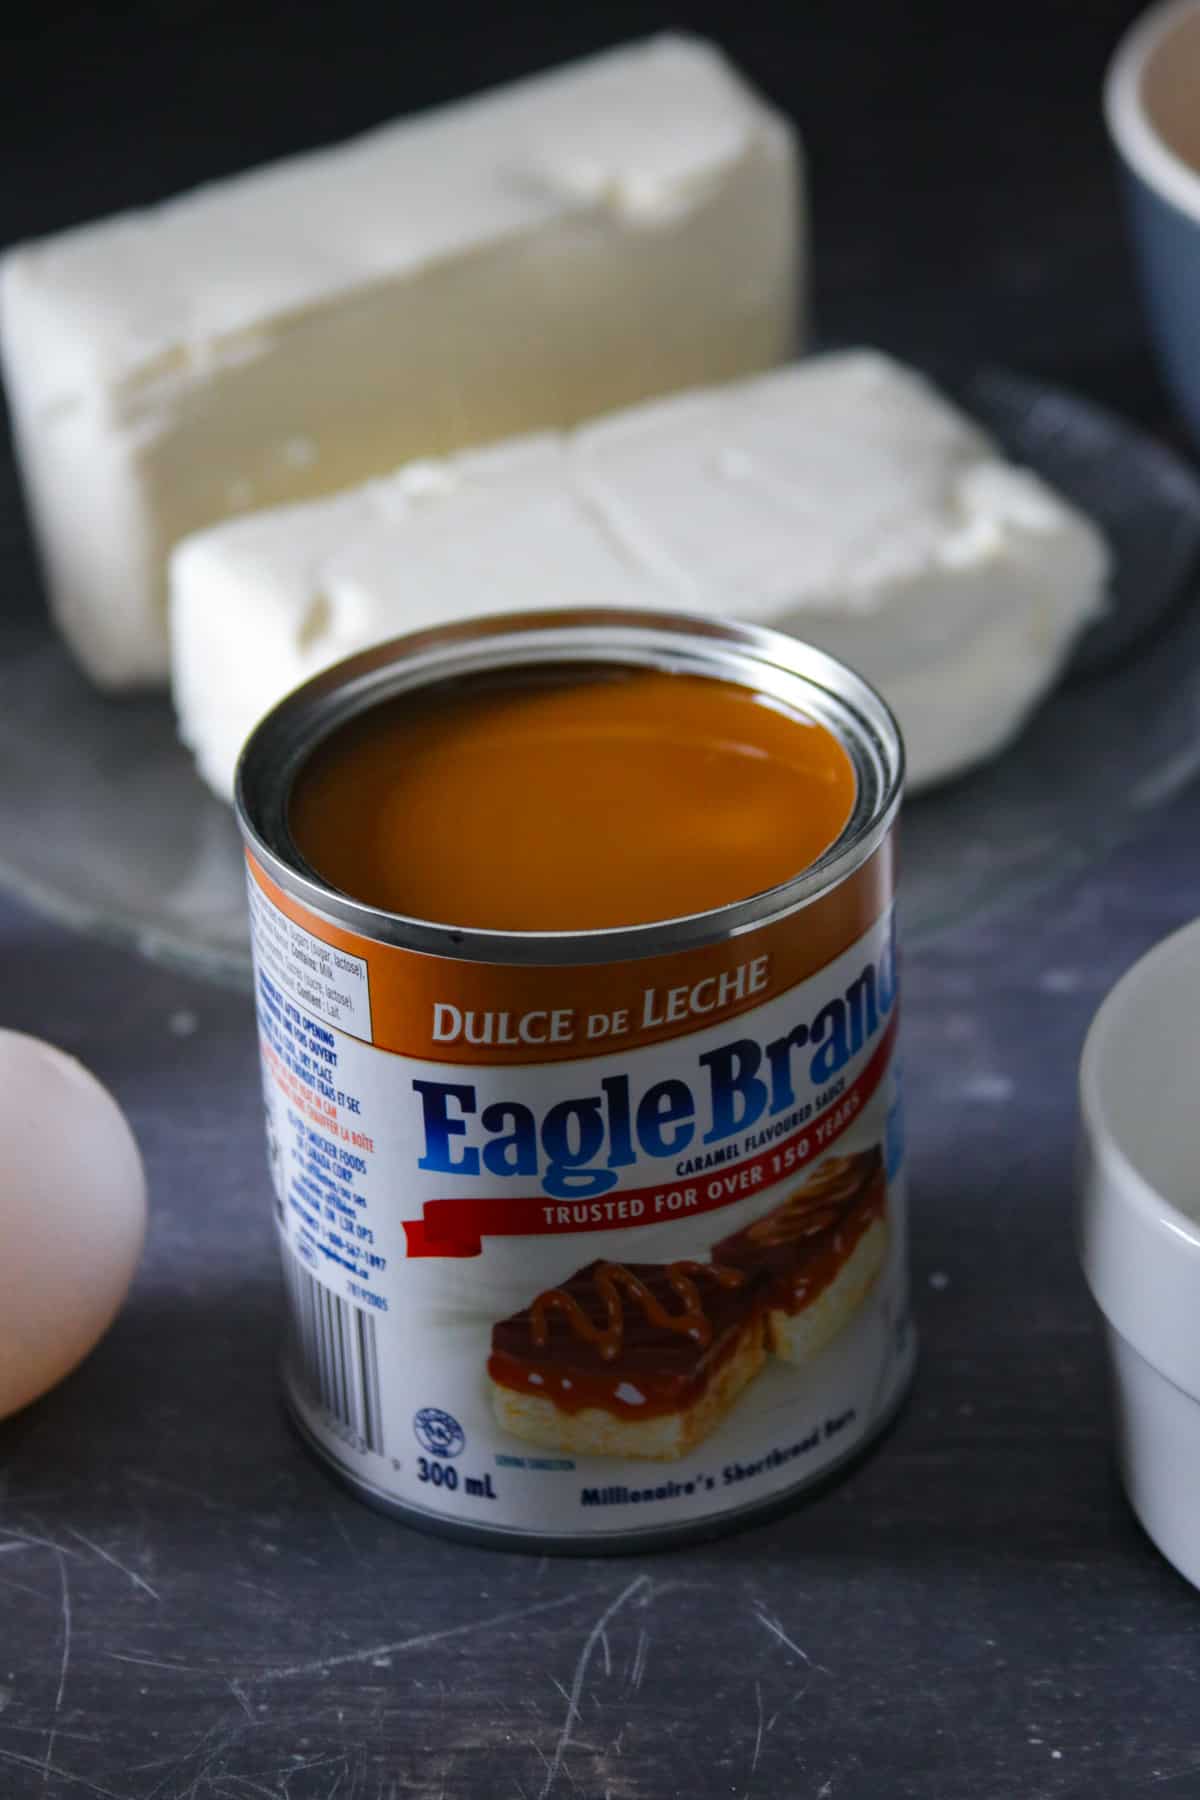 An opened can of Eagle Brand dulce de leche.